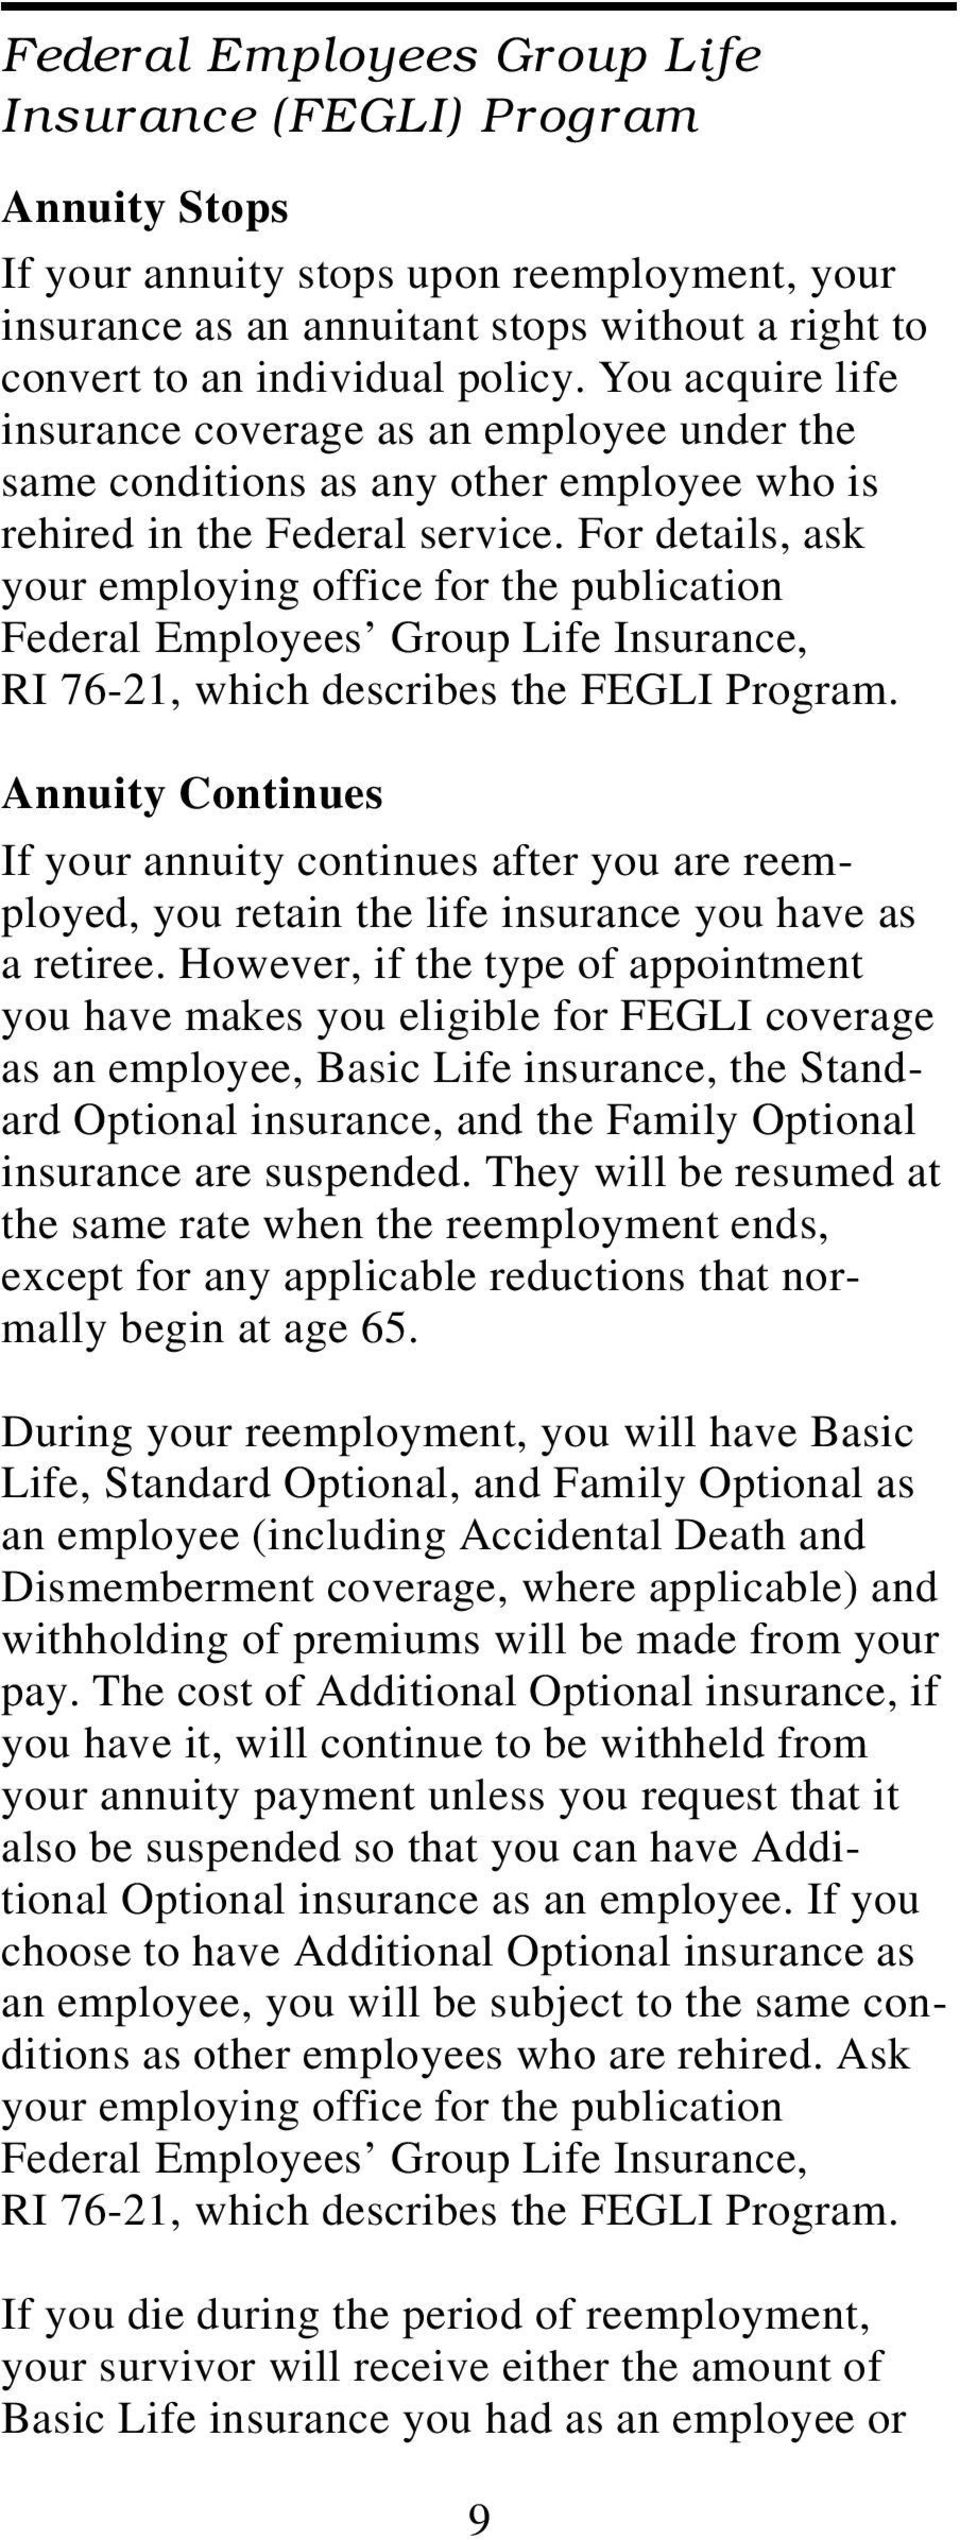 For details, ask your employing office for the publication Federal Employees Group Life Insurance, RI 76-21, which describes the FEGLI Program.